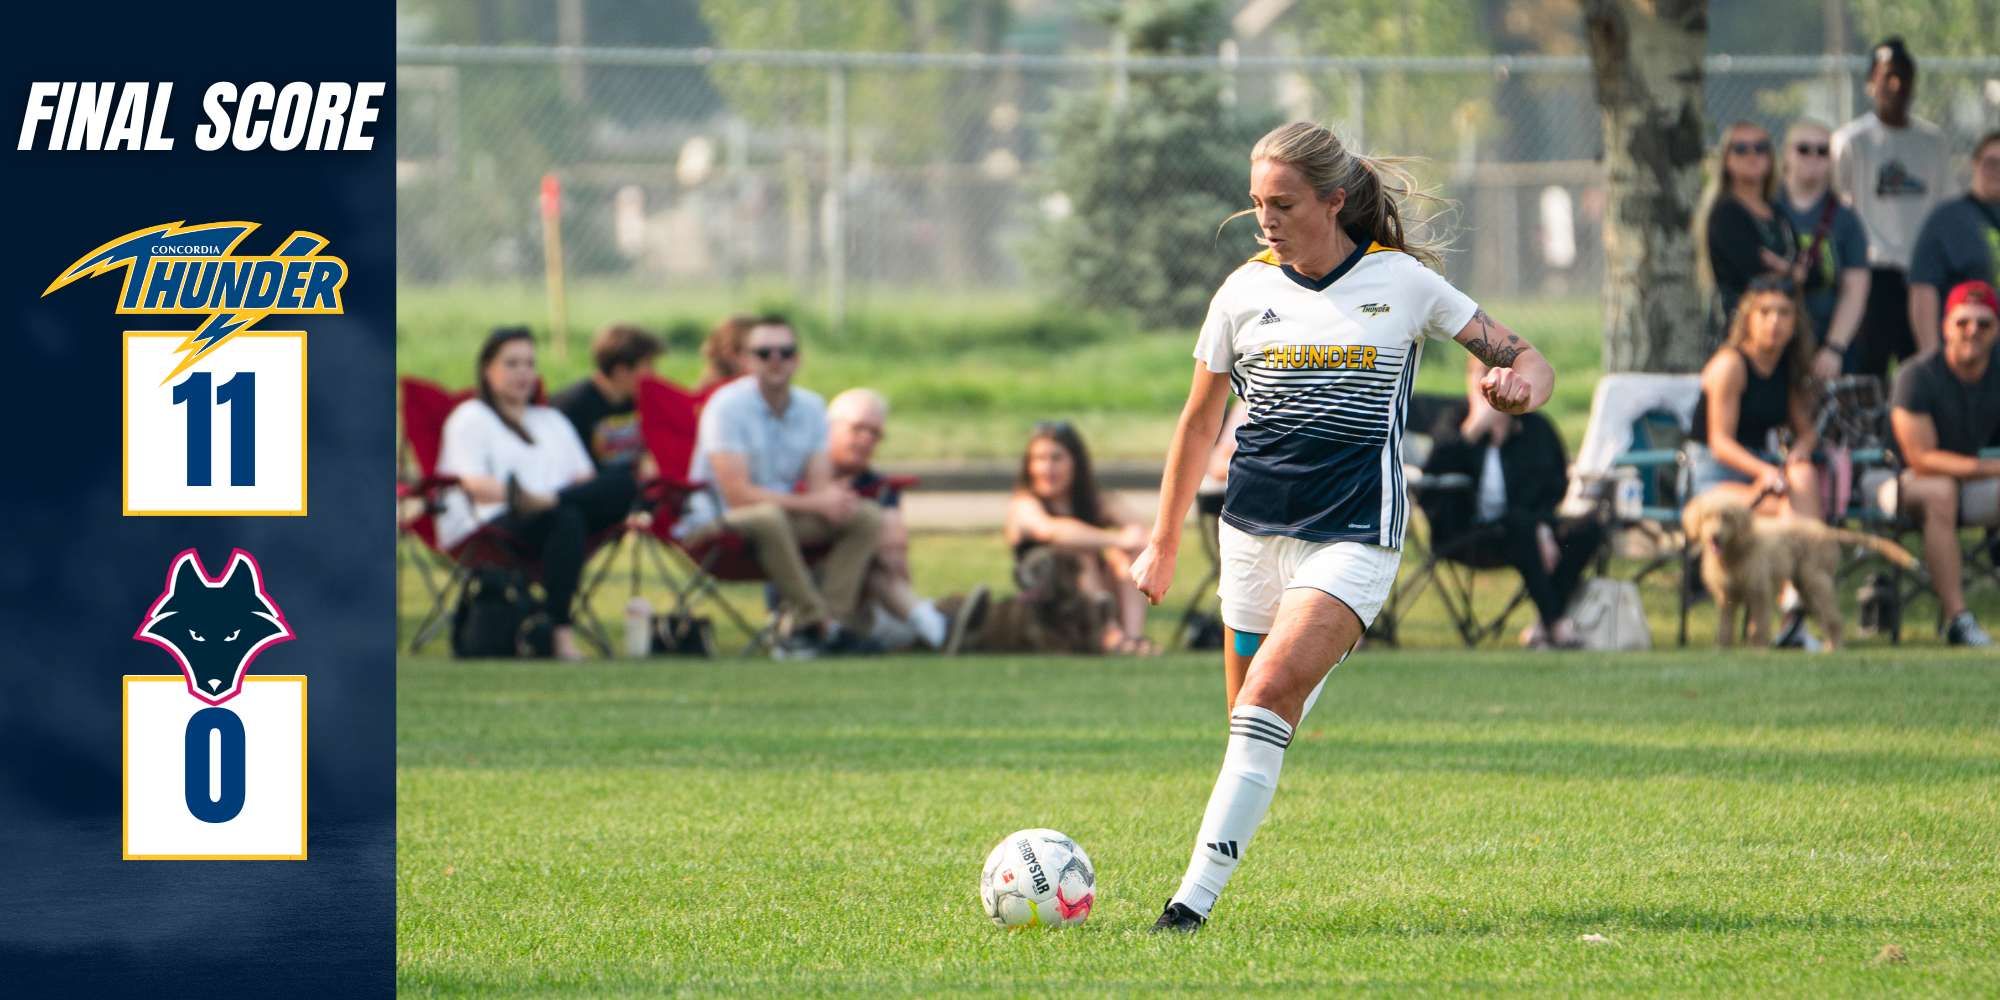 Concordia Thunder Ends Regular Season with Convincing 11-0 Victory Over Wolves